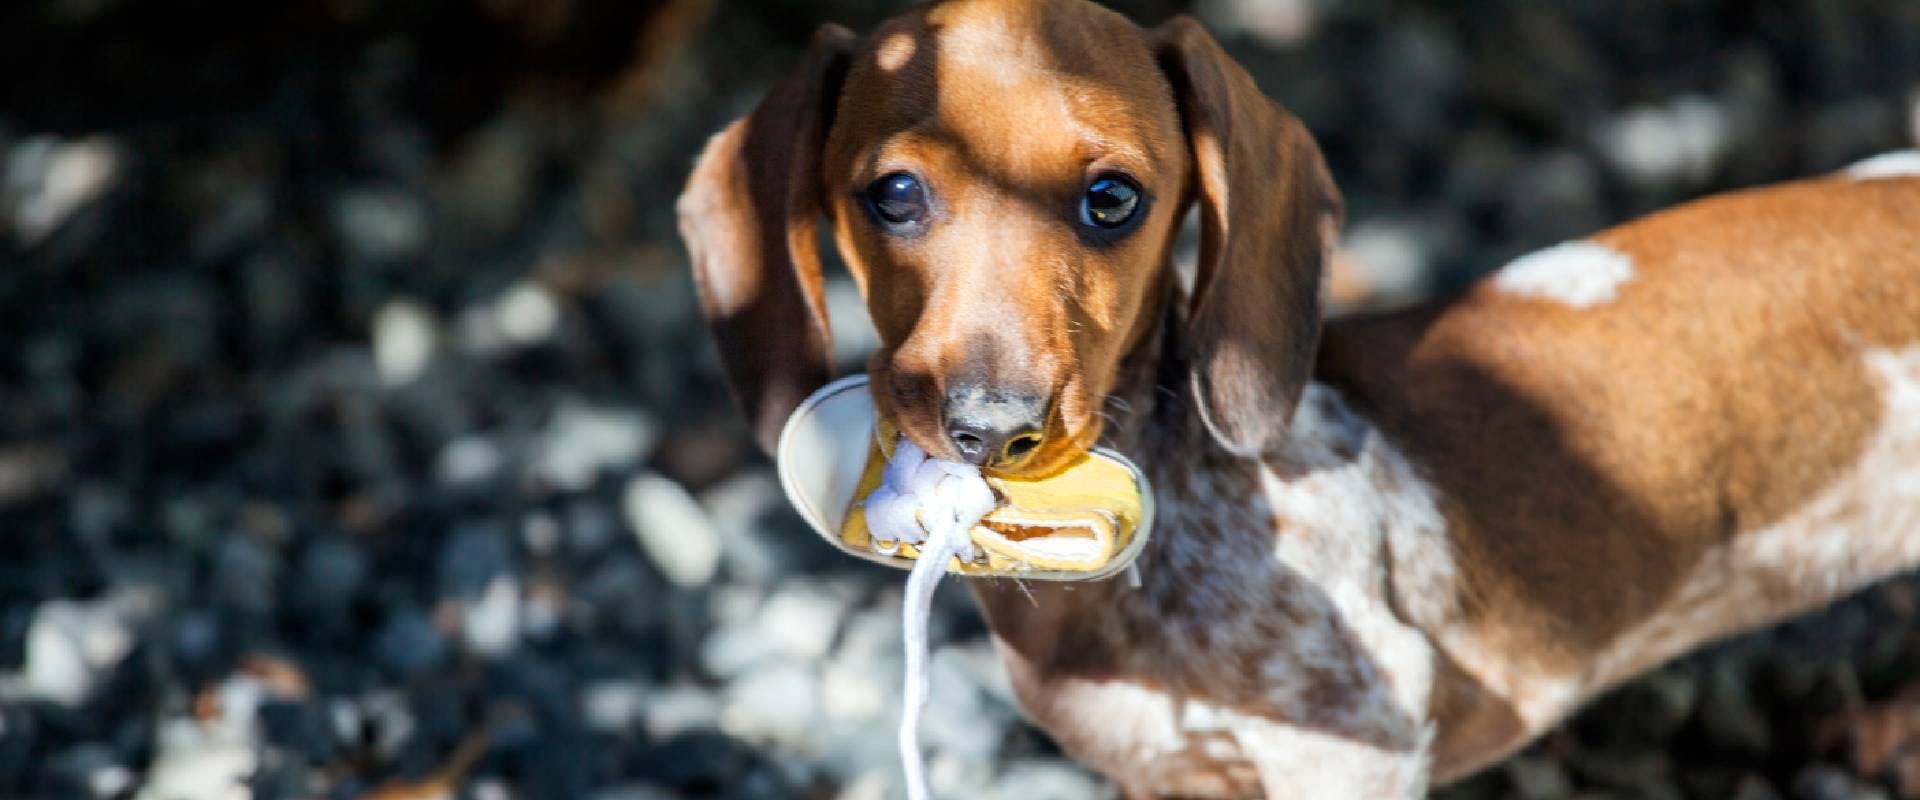 Dachshund puppy holding a dog shoe in their mouth